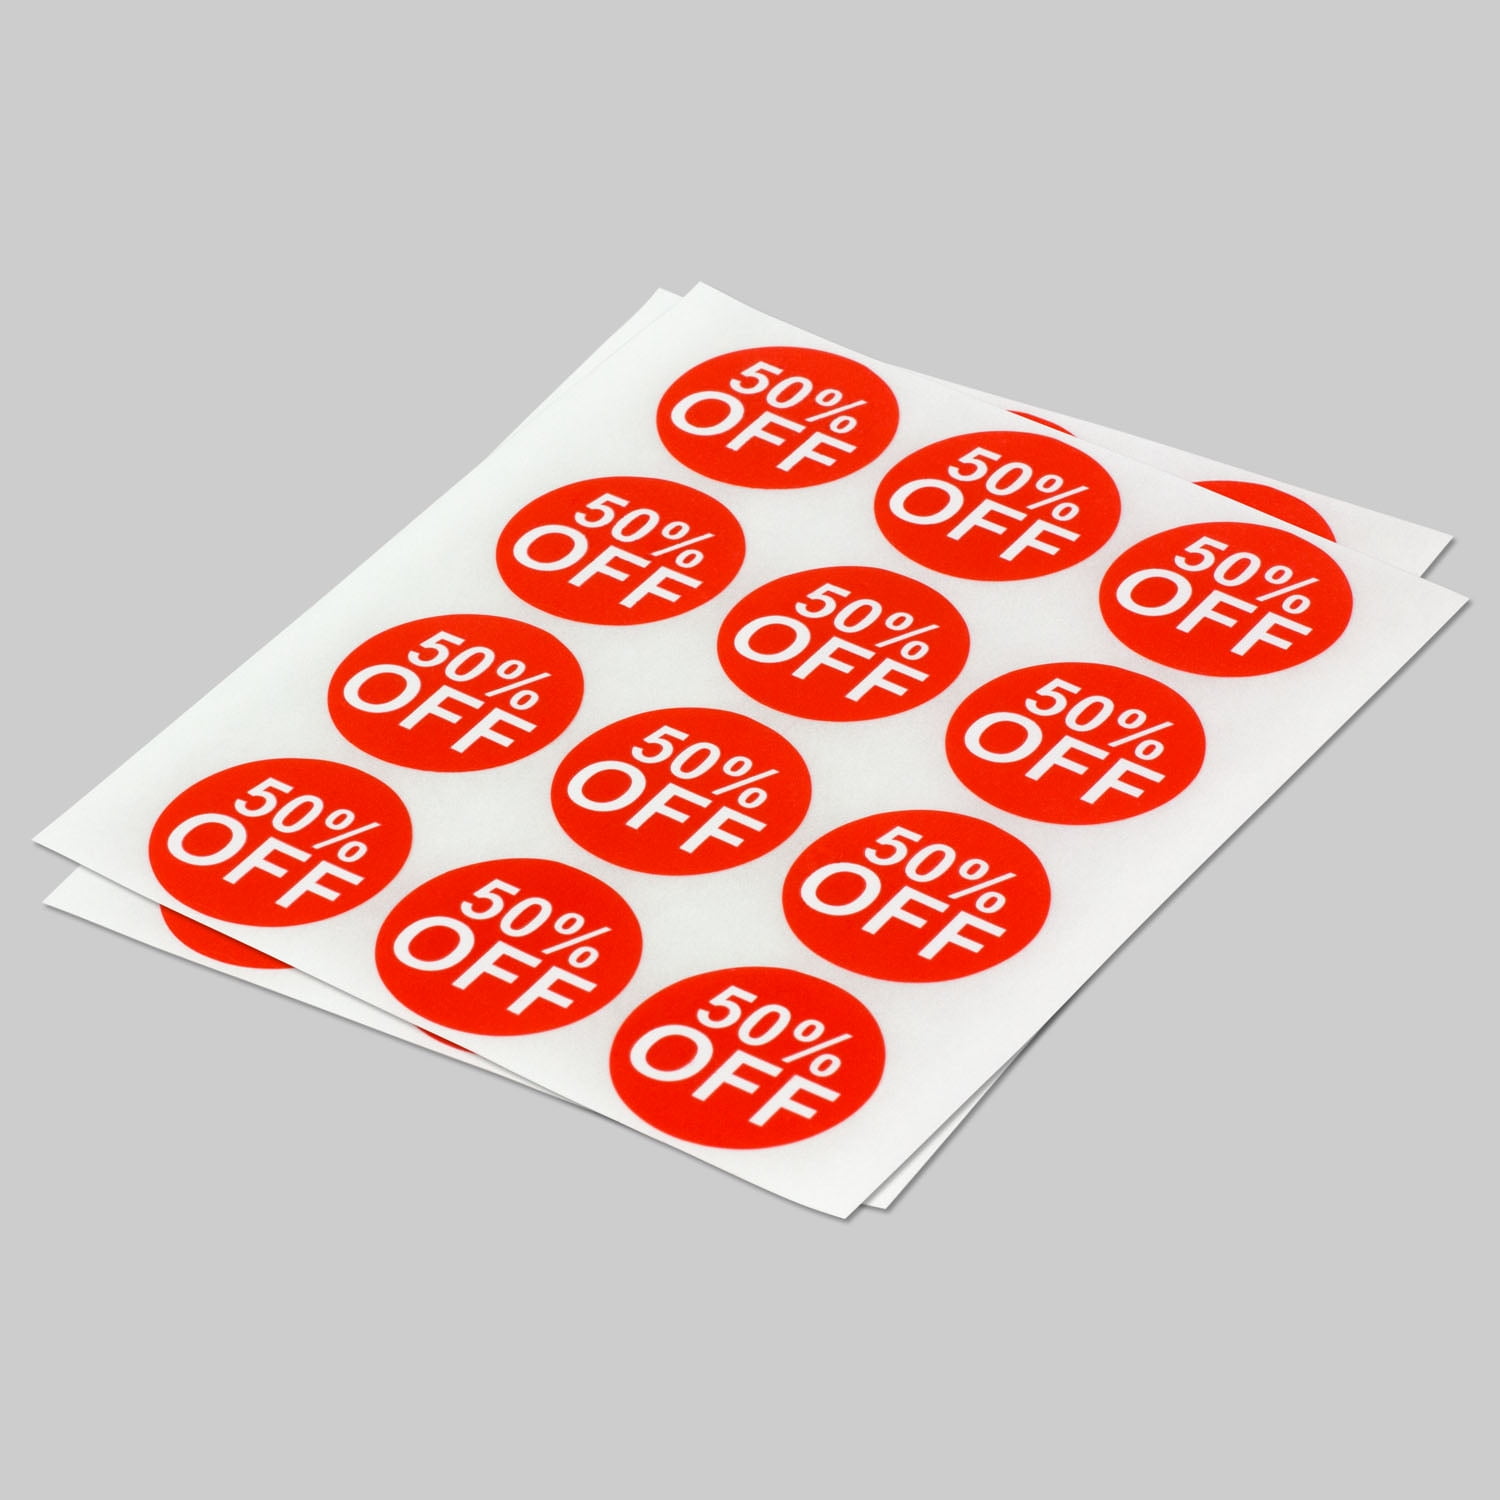 Best Mail Ever stickers 30 stickers 2 sheets Happy Mail Postage labels Circle 1.25 inch